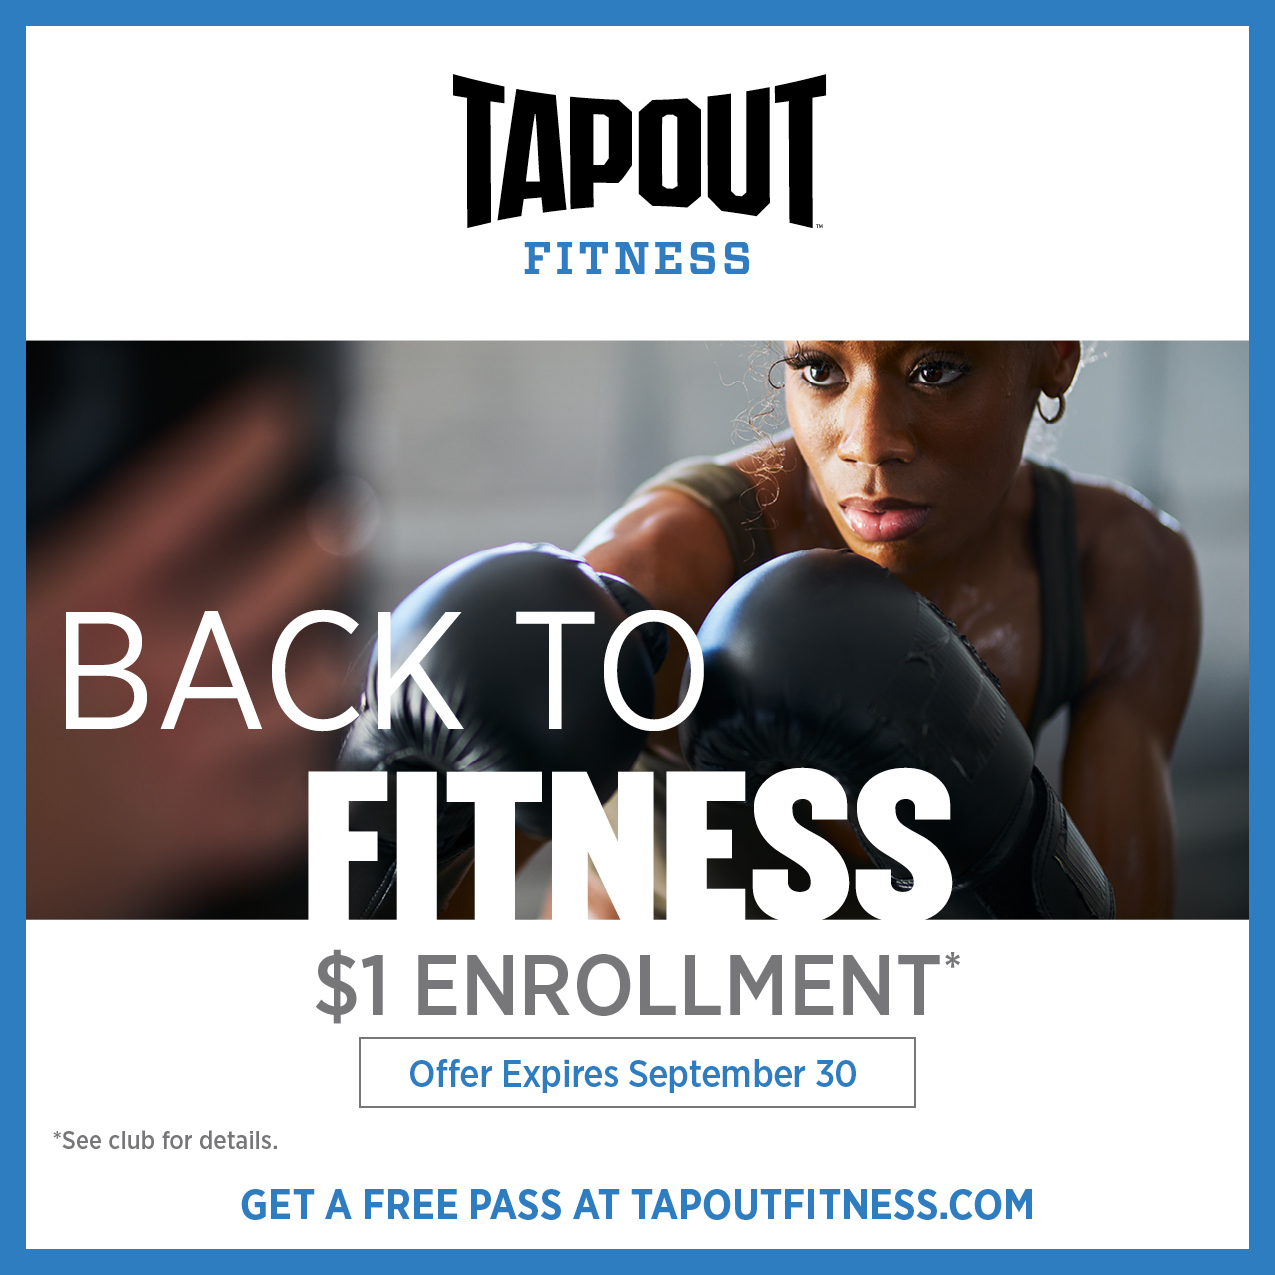 Tapout Fitness post